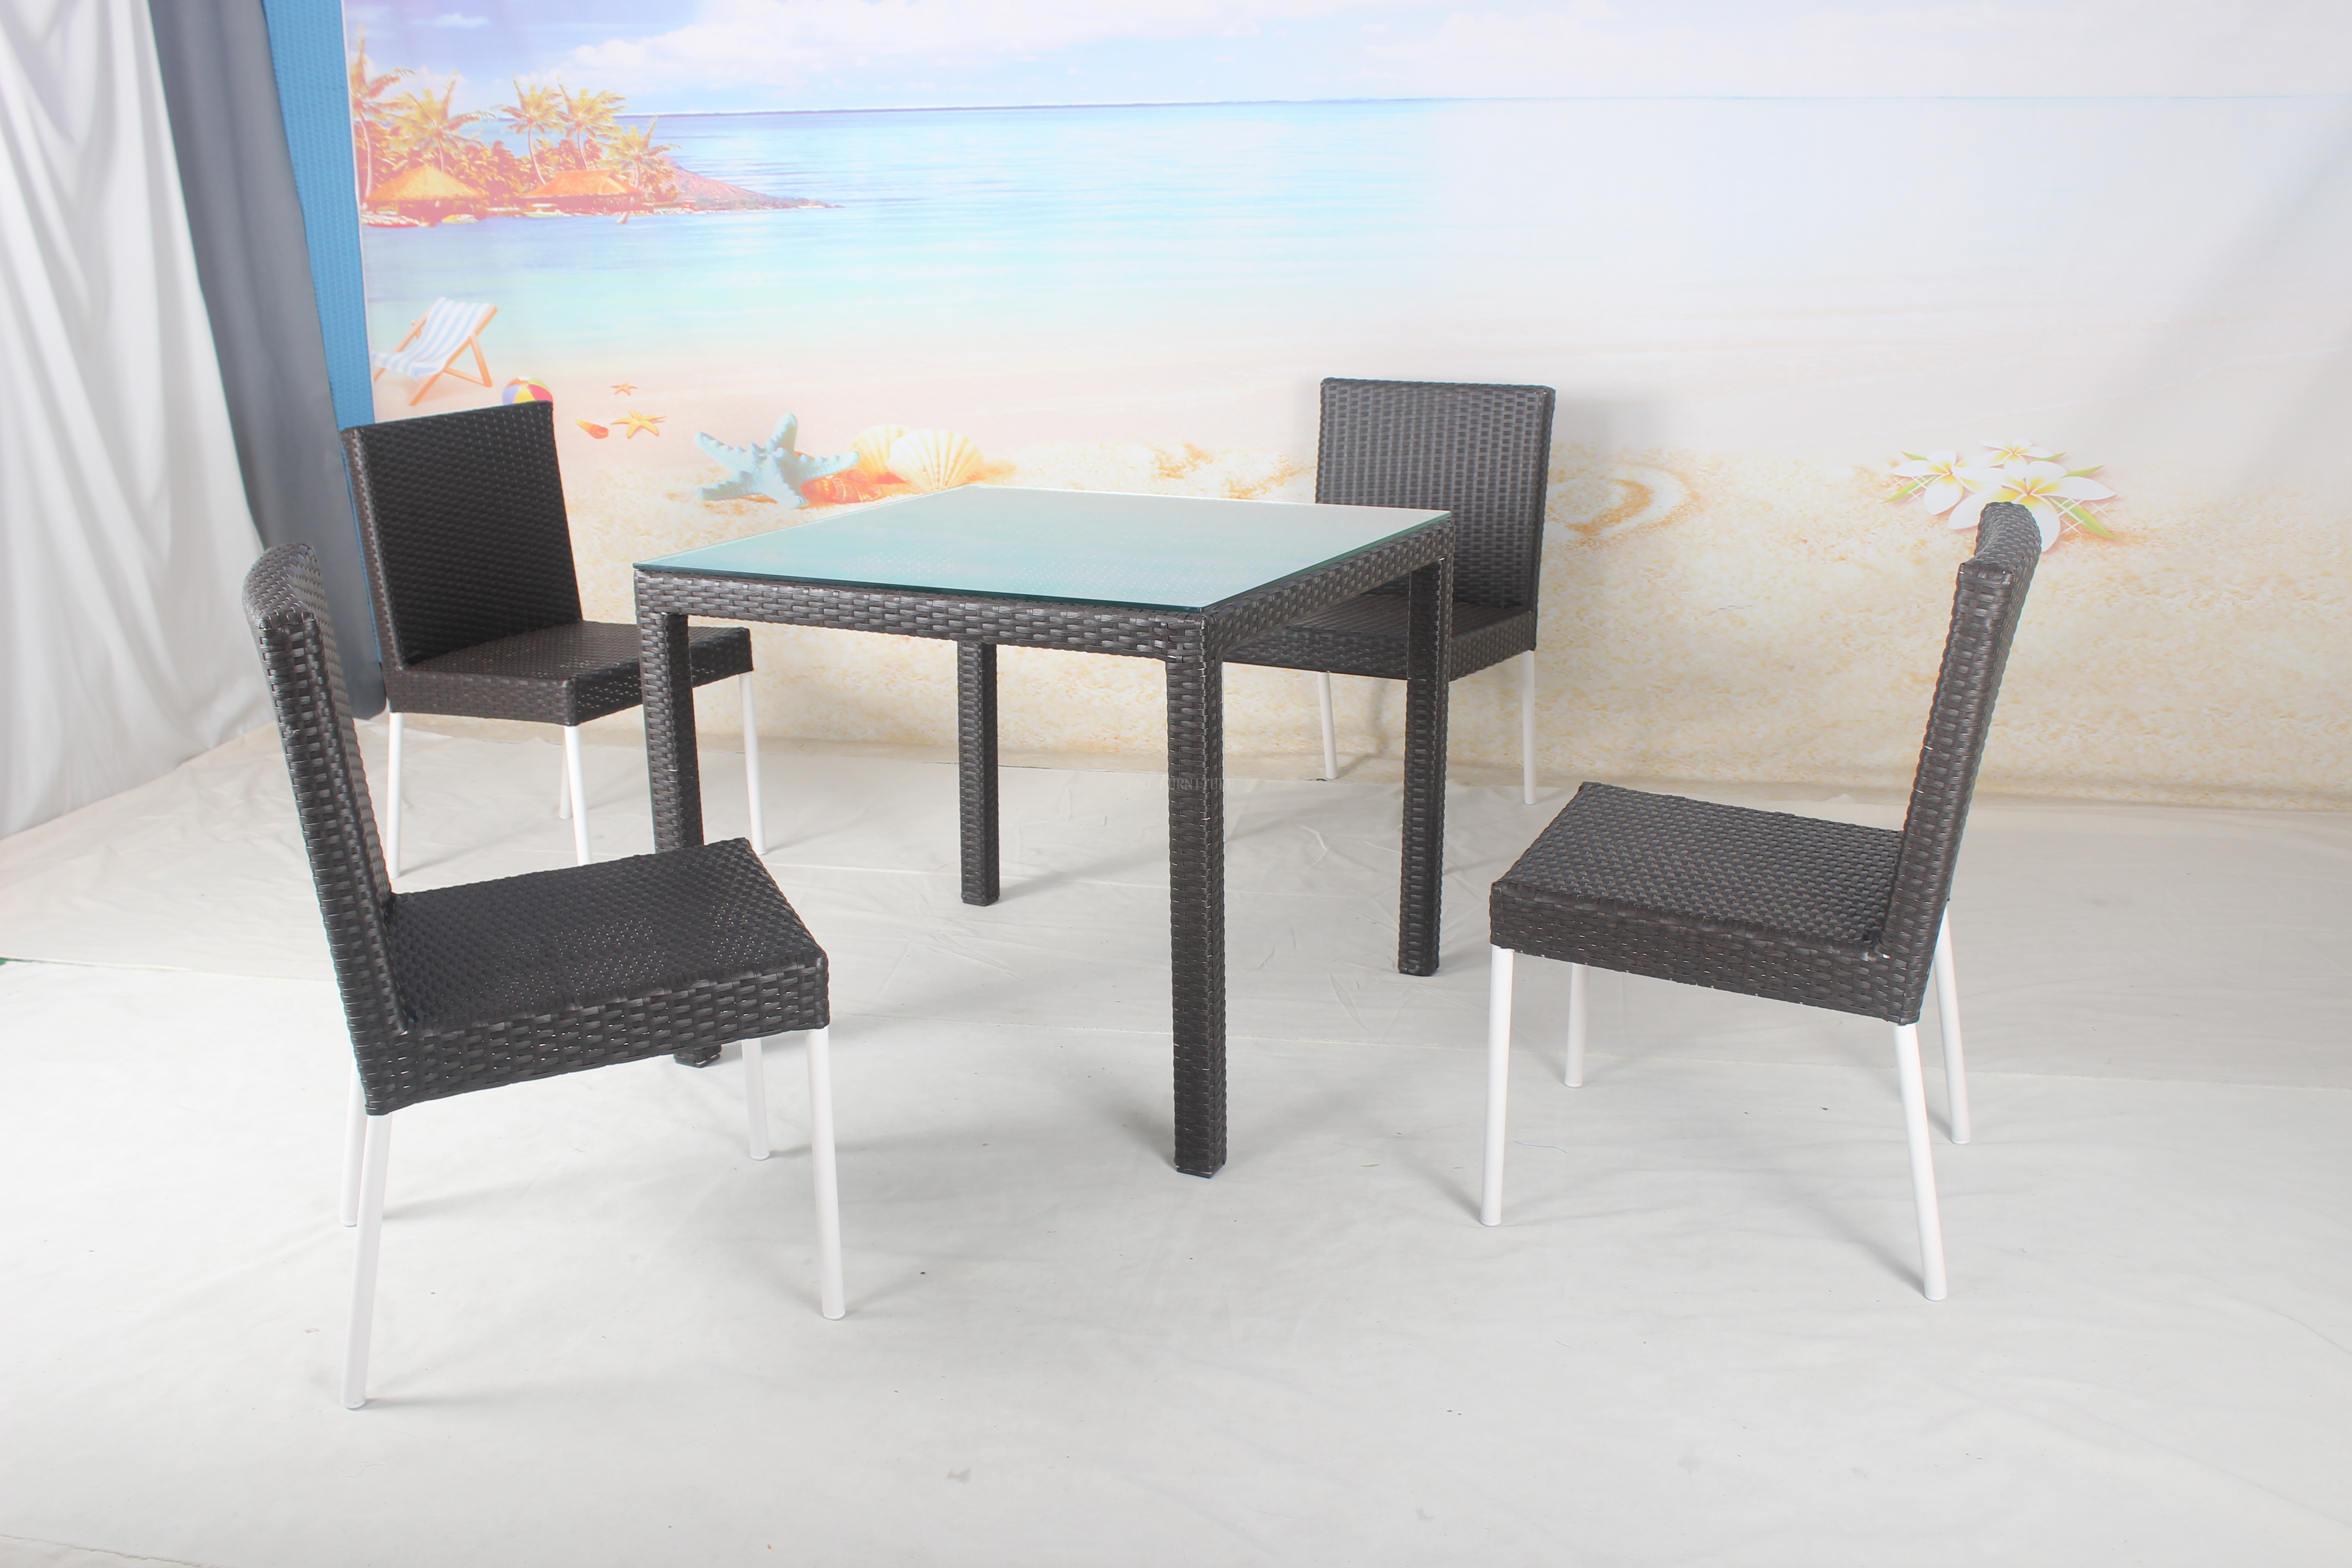 Outdoor rattan dining square table and chairs